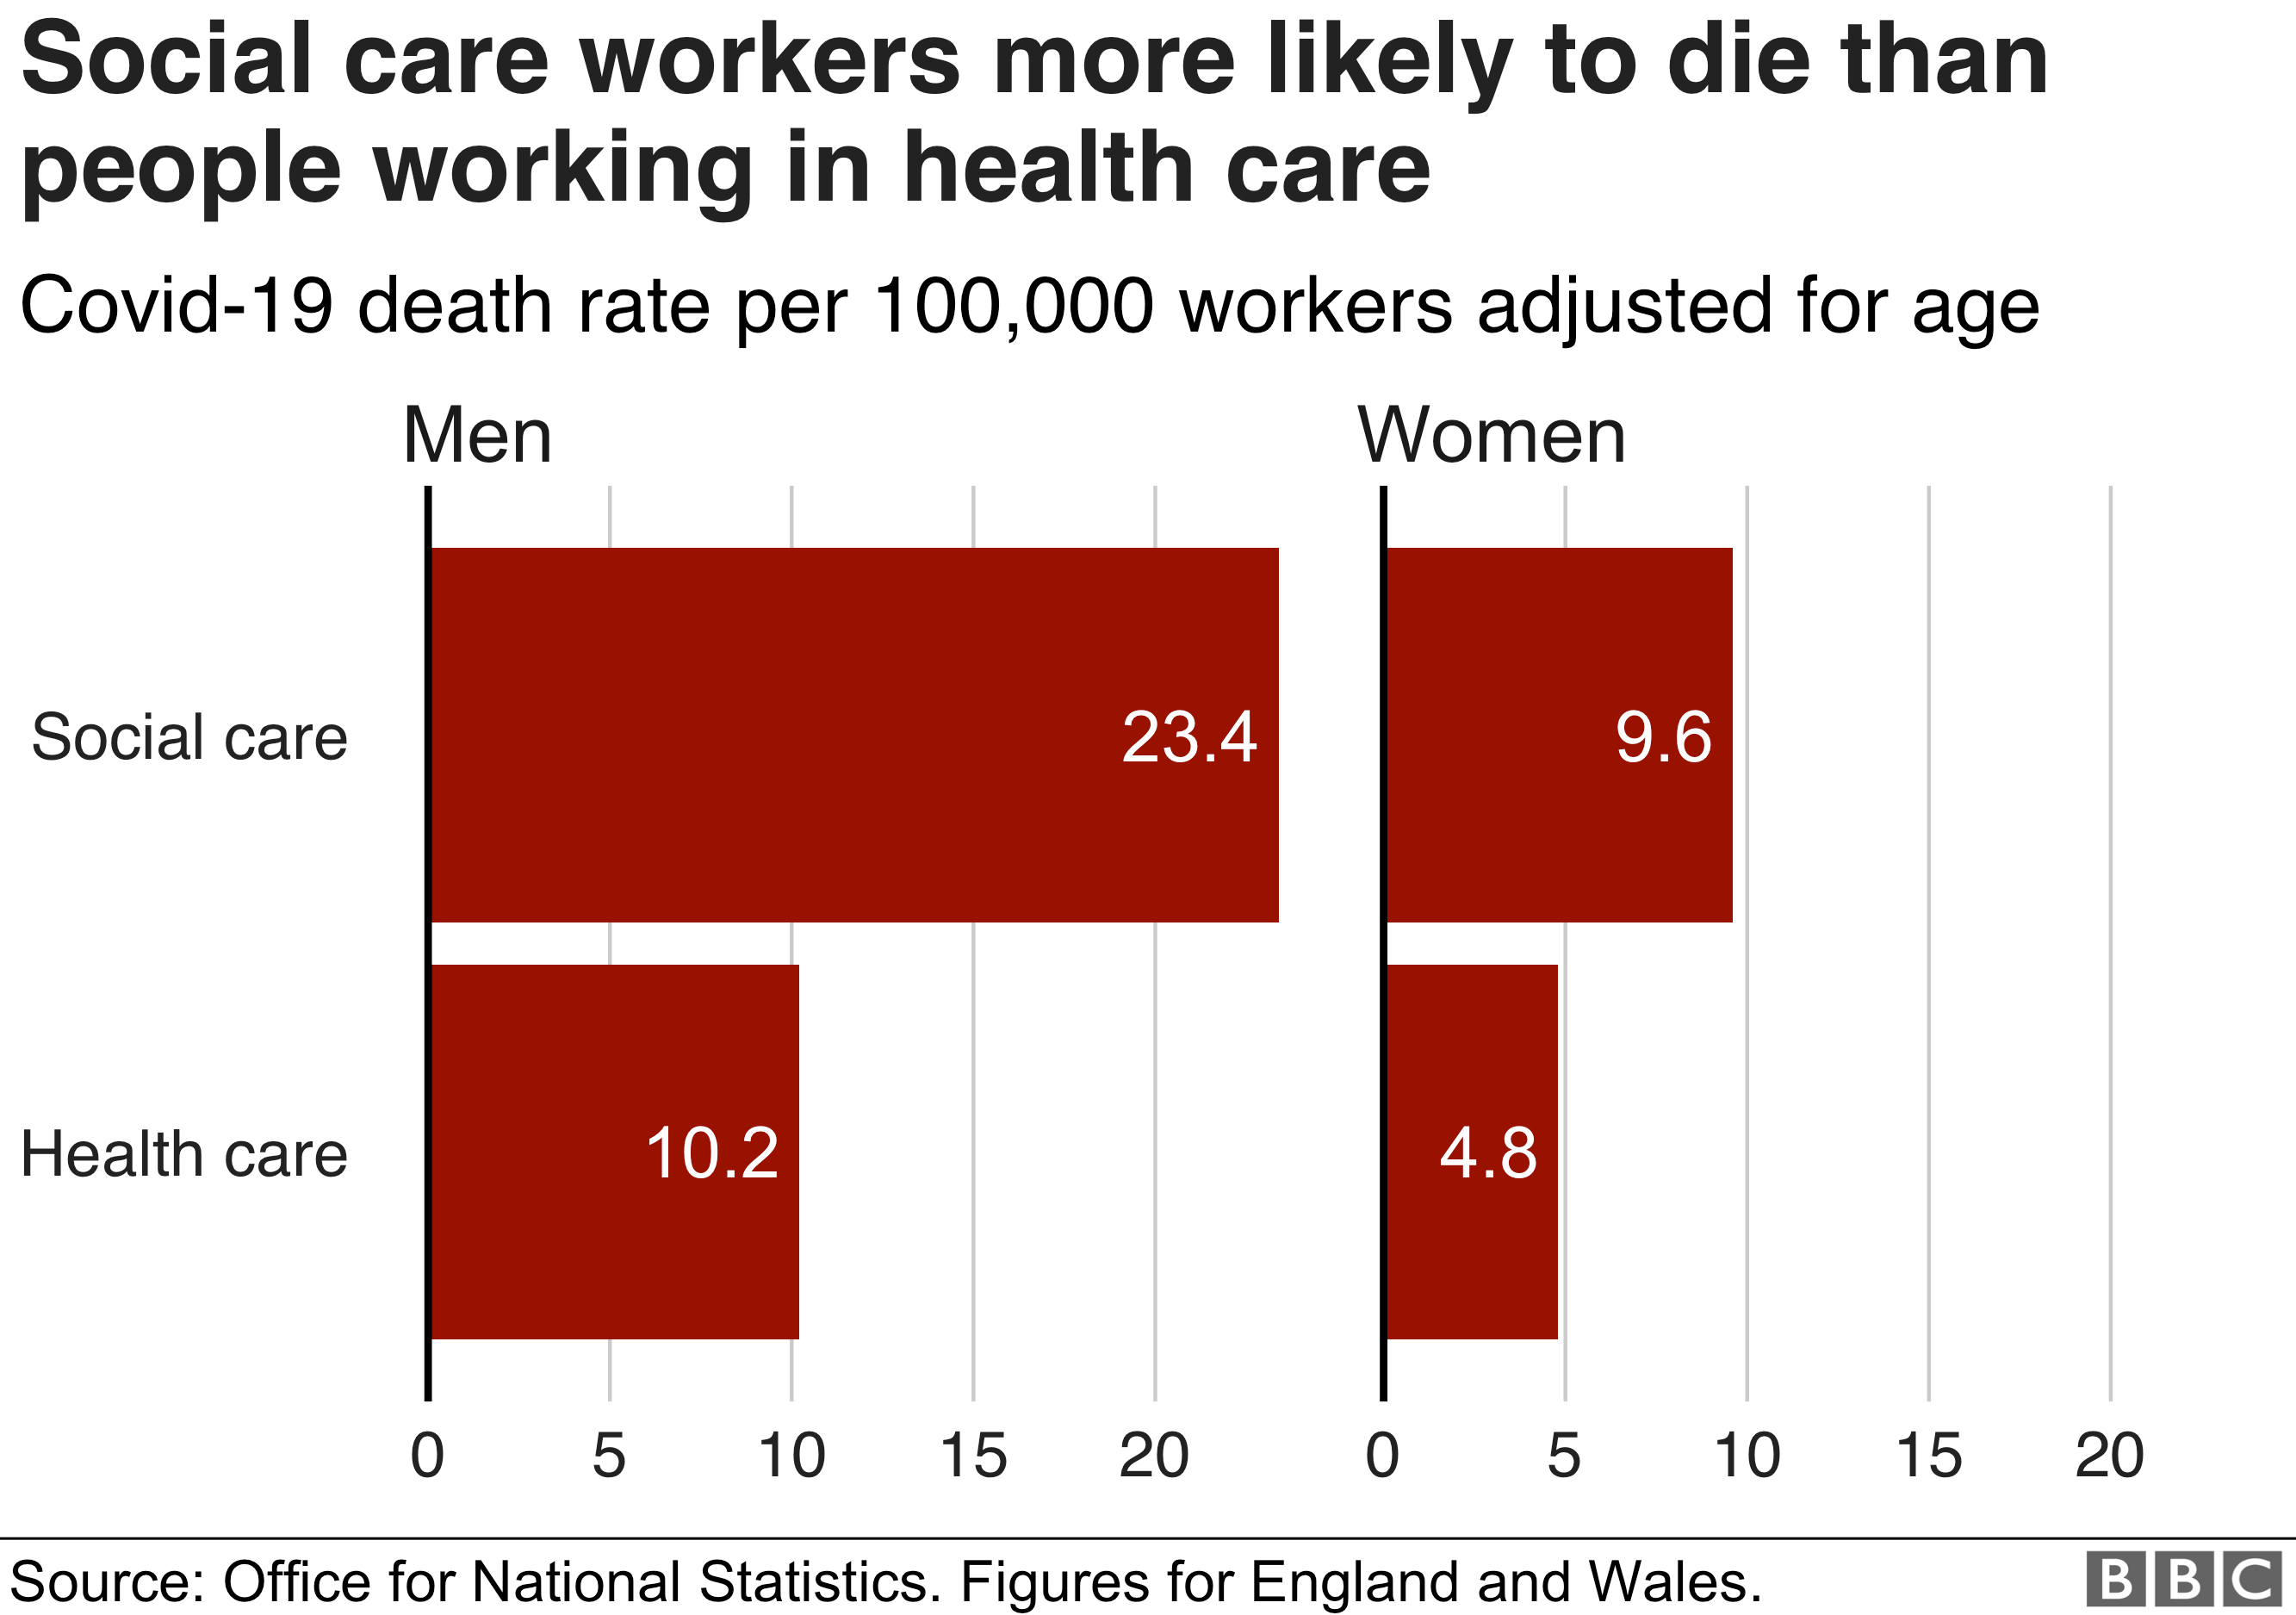 Social care workers more likely to die than people working in healthcare